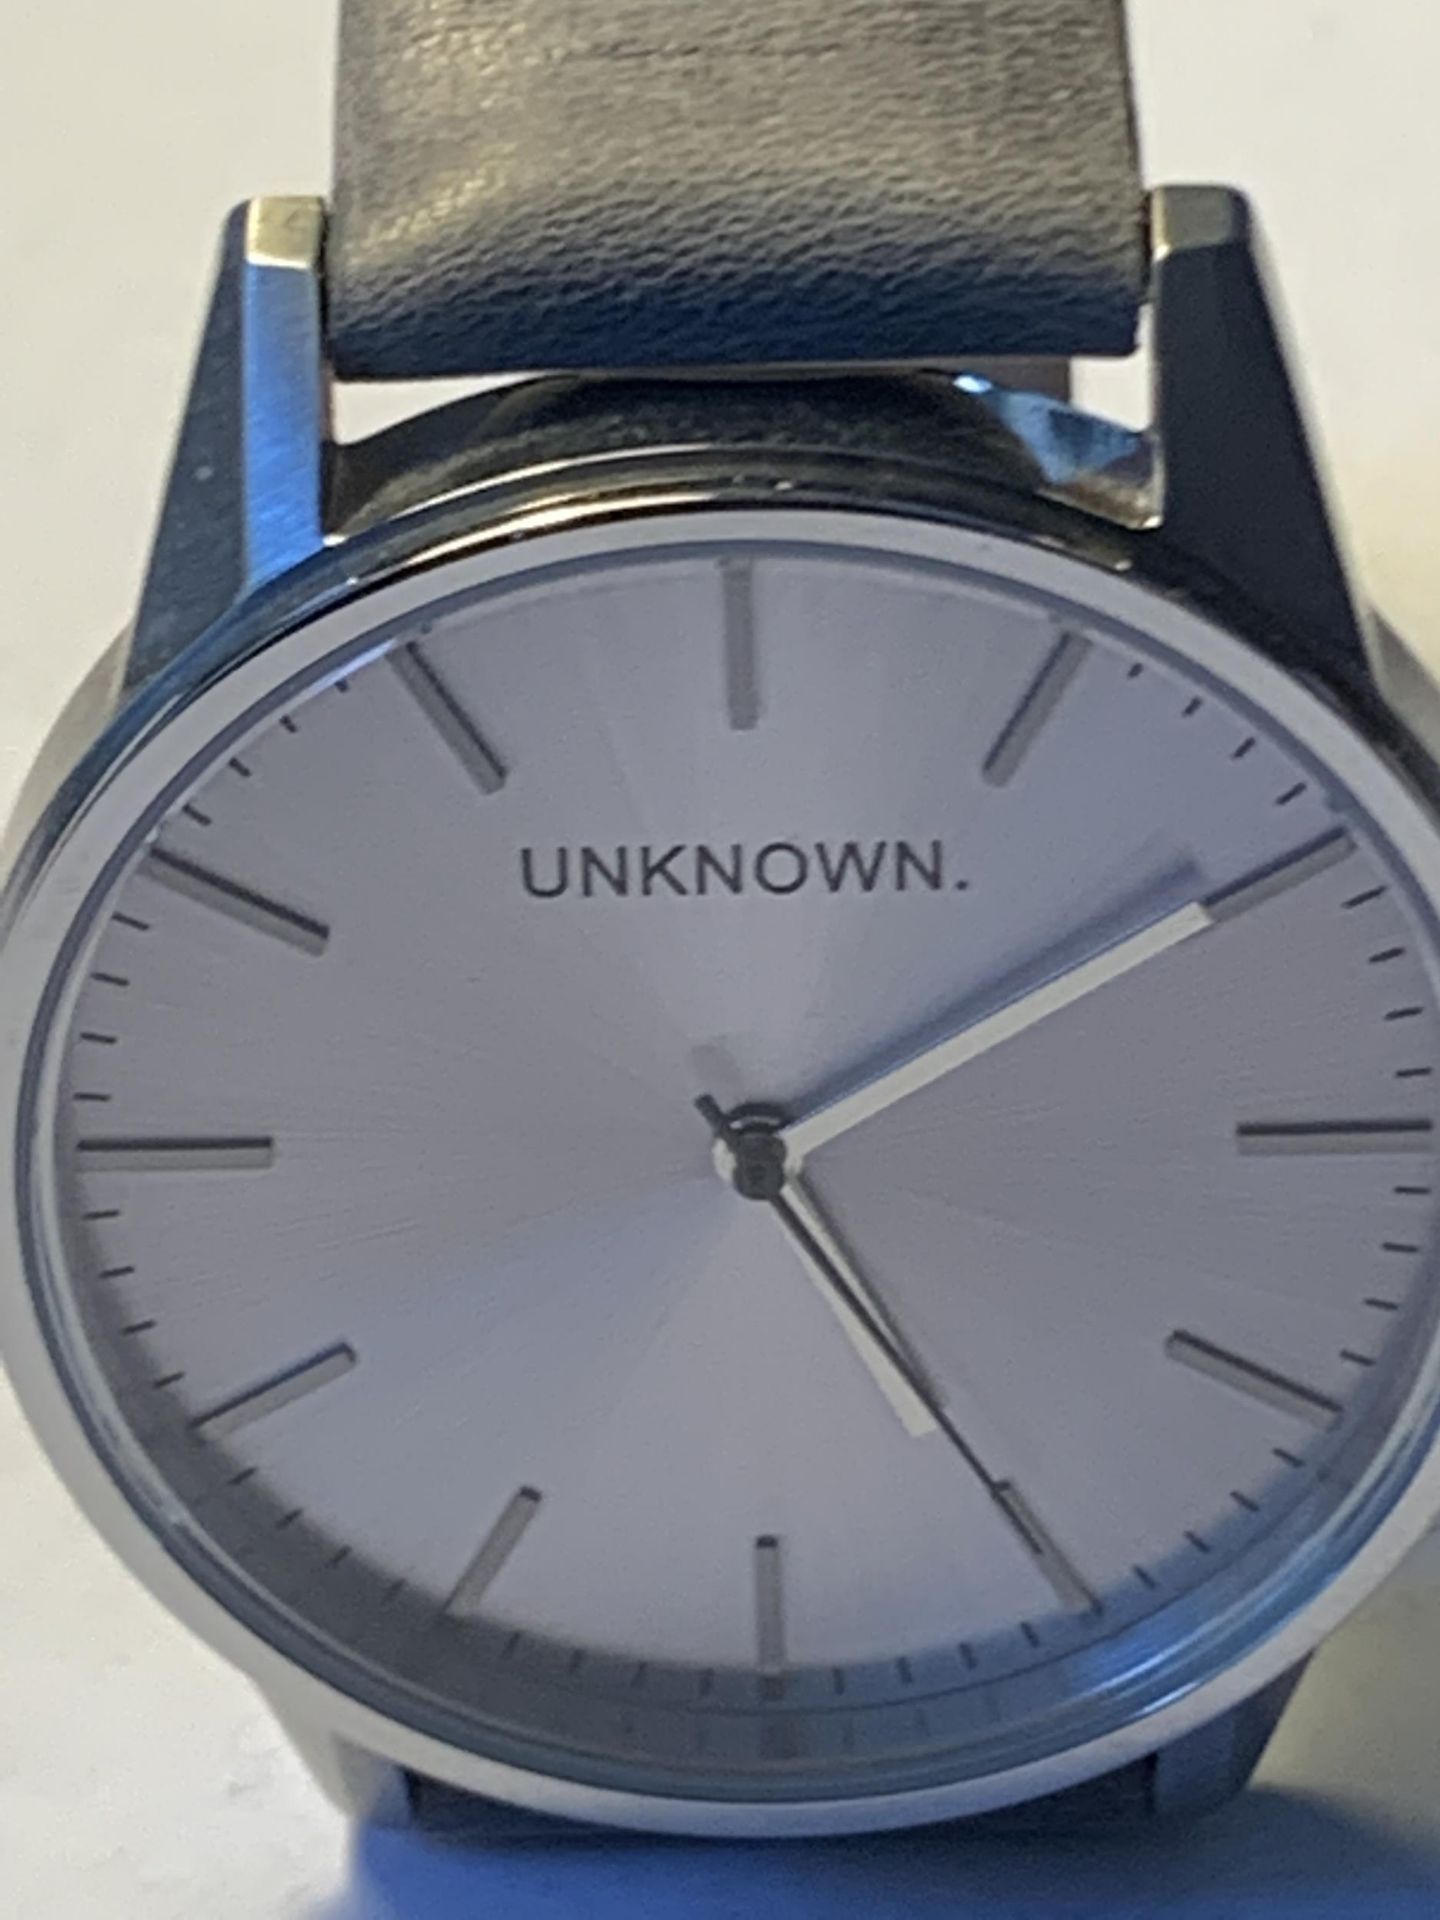 AN UNKNOWN WRISTWATCH SEEN WORKING BUT NO WARRANTY - Image 2 of 3